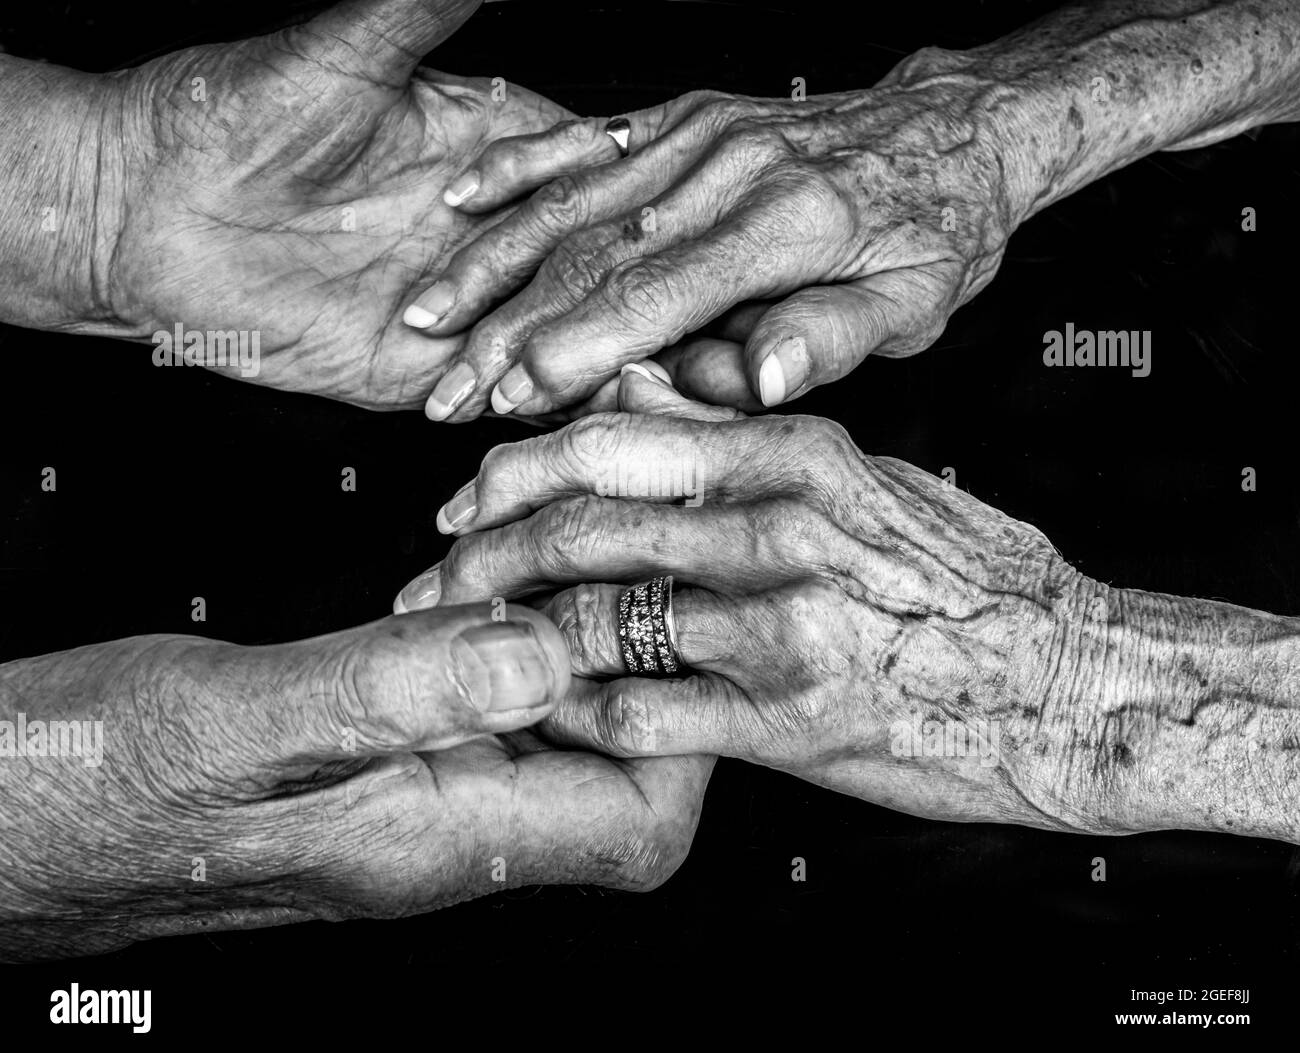 A black and white image of an elderly couple holding hands. The woman is wearing a wedding ring and both appear to have advanced arthritis. Stock Photo